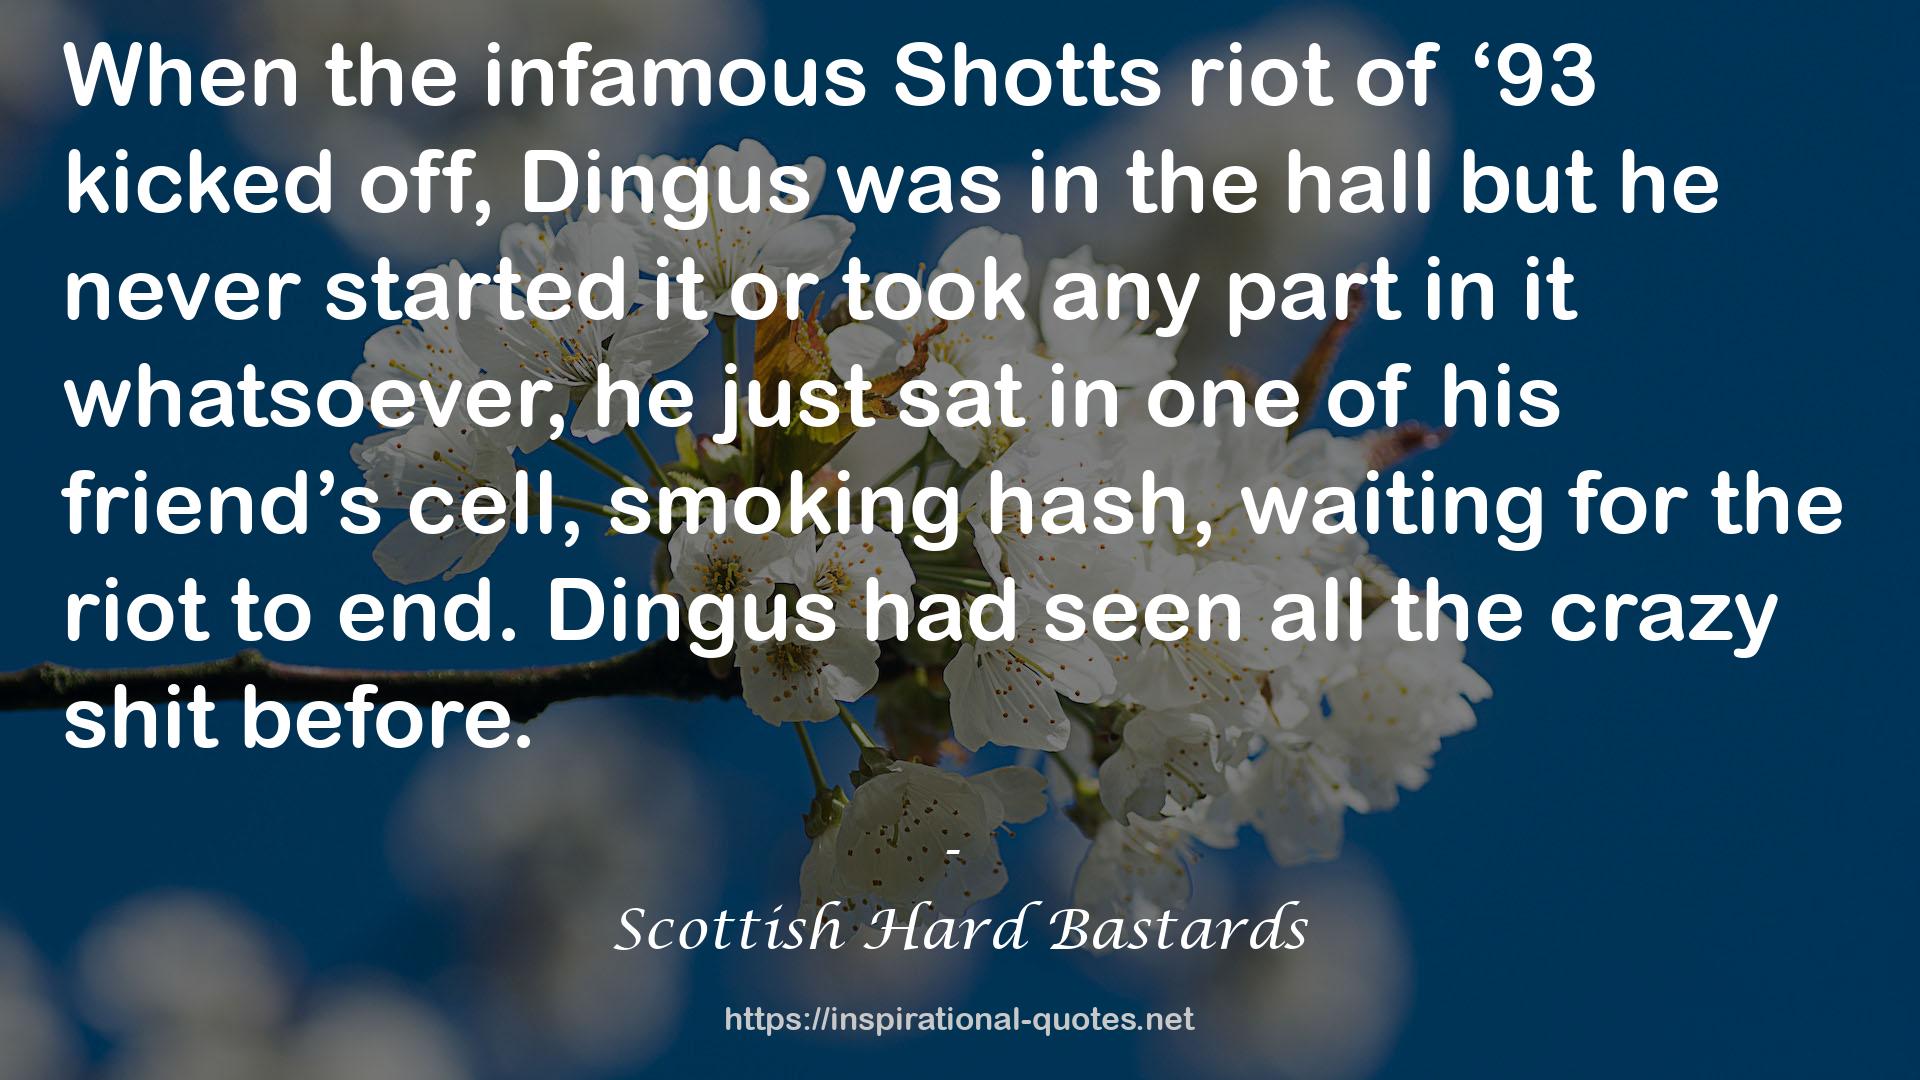 the infamous Shotts riot  QUOTES